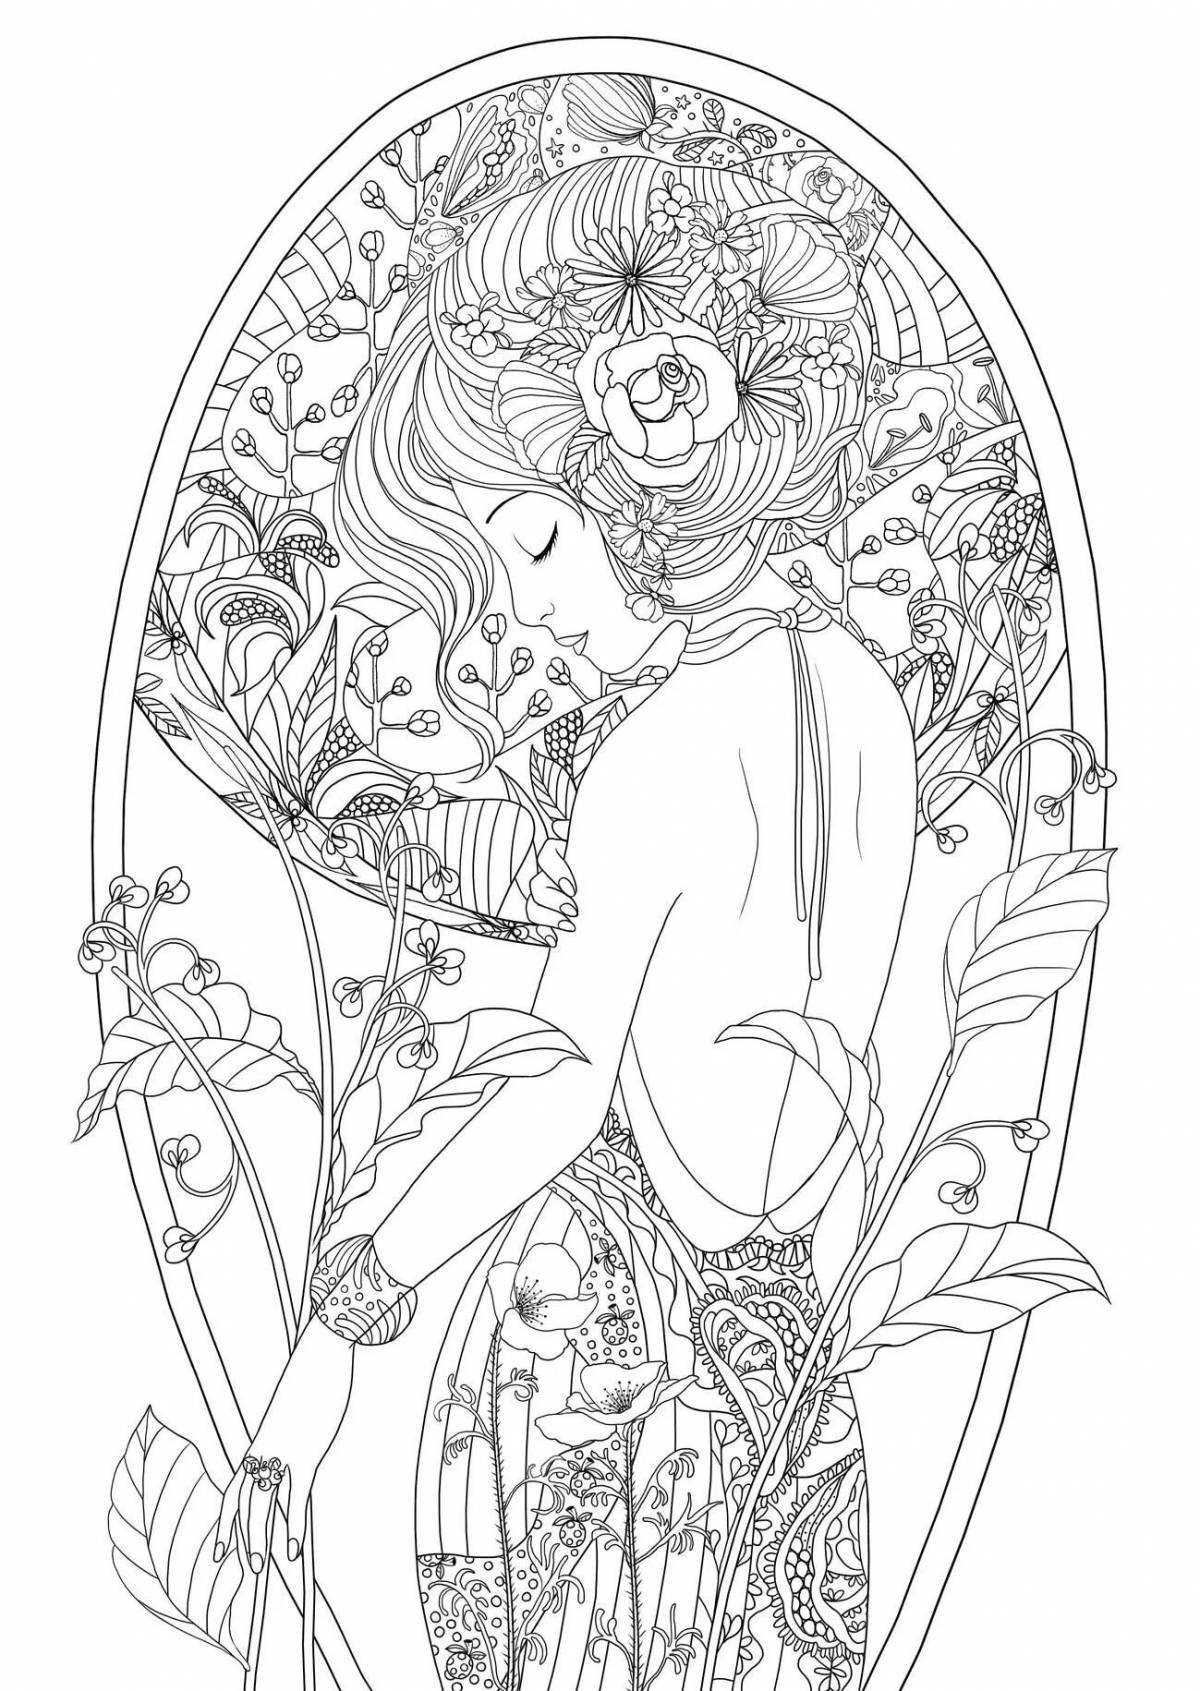 Royal adult coloring pages